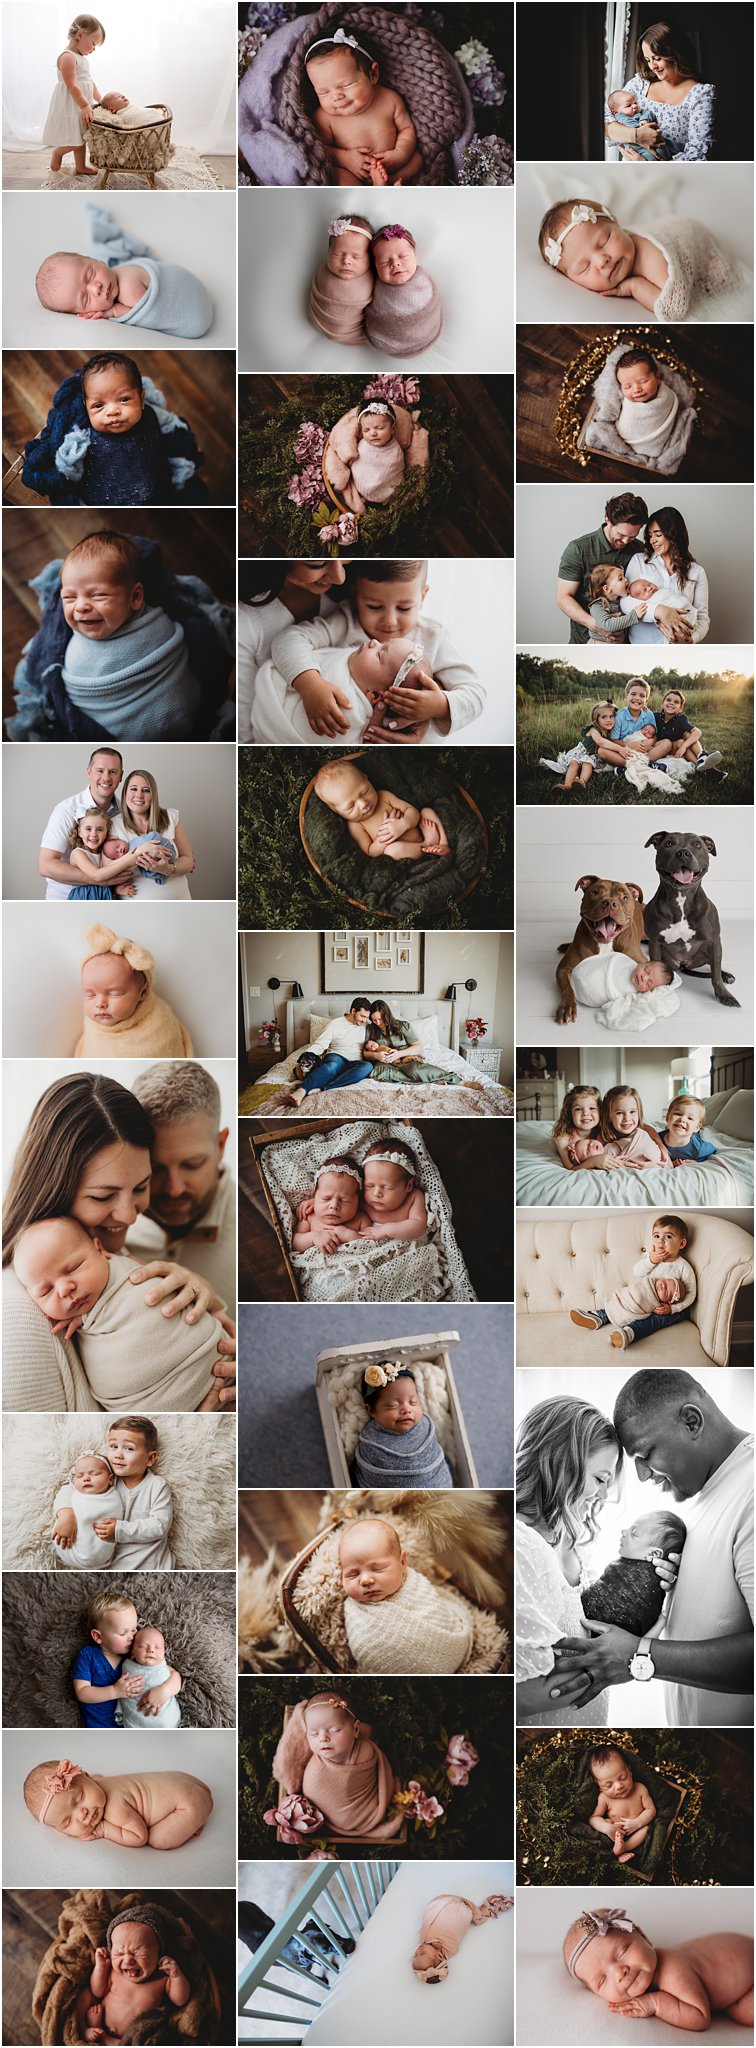 Lots of babies - Indianapolis Newborn Photography by KristeenMarie